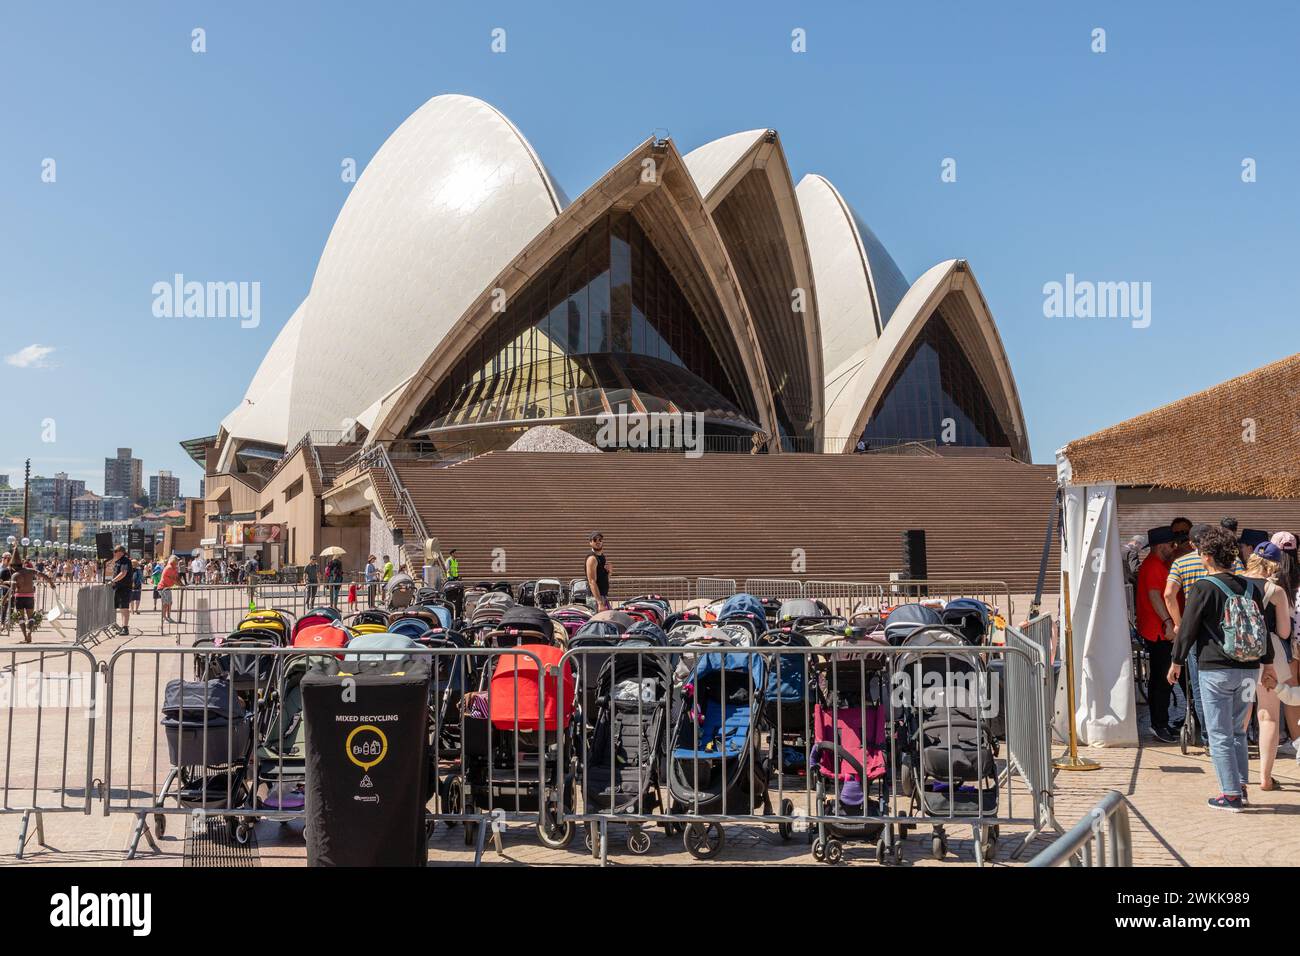 The iconic Sydney Opera House, a dominant city landmark since opening in 1973, celebrated its 50th anniversary with a crowded open house weekend. Stock Photo